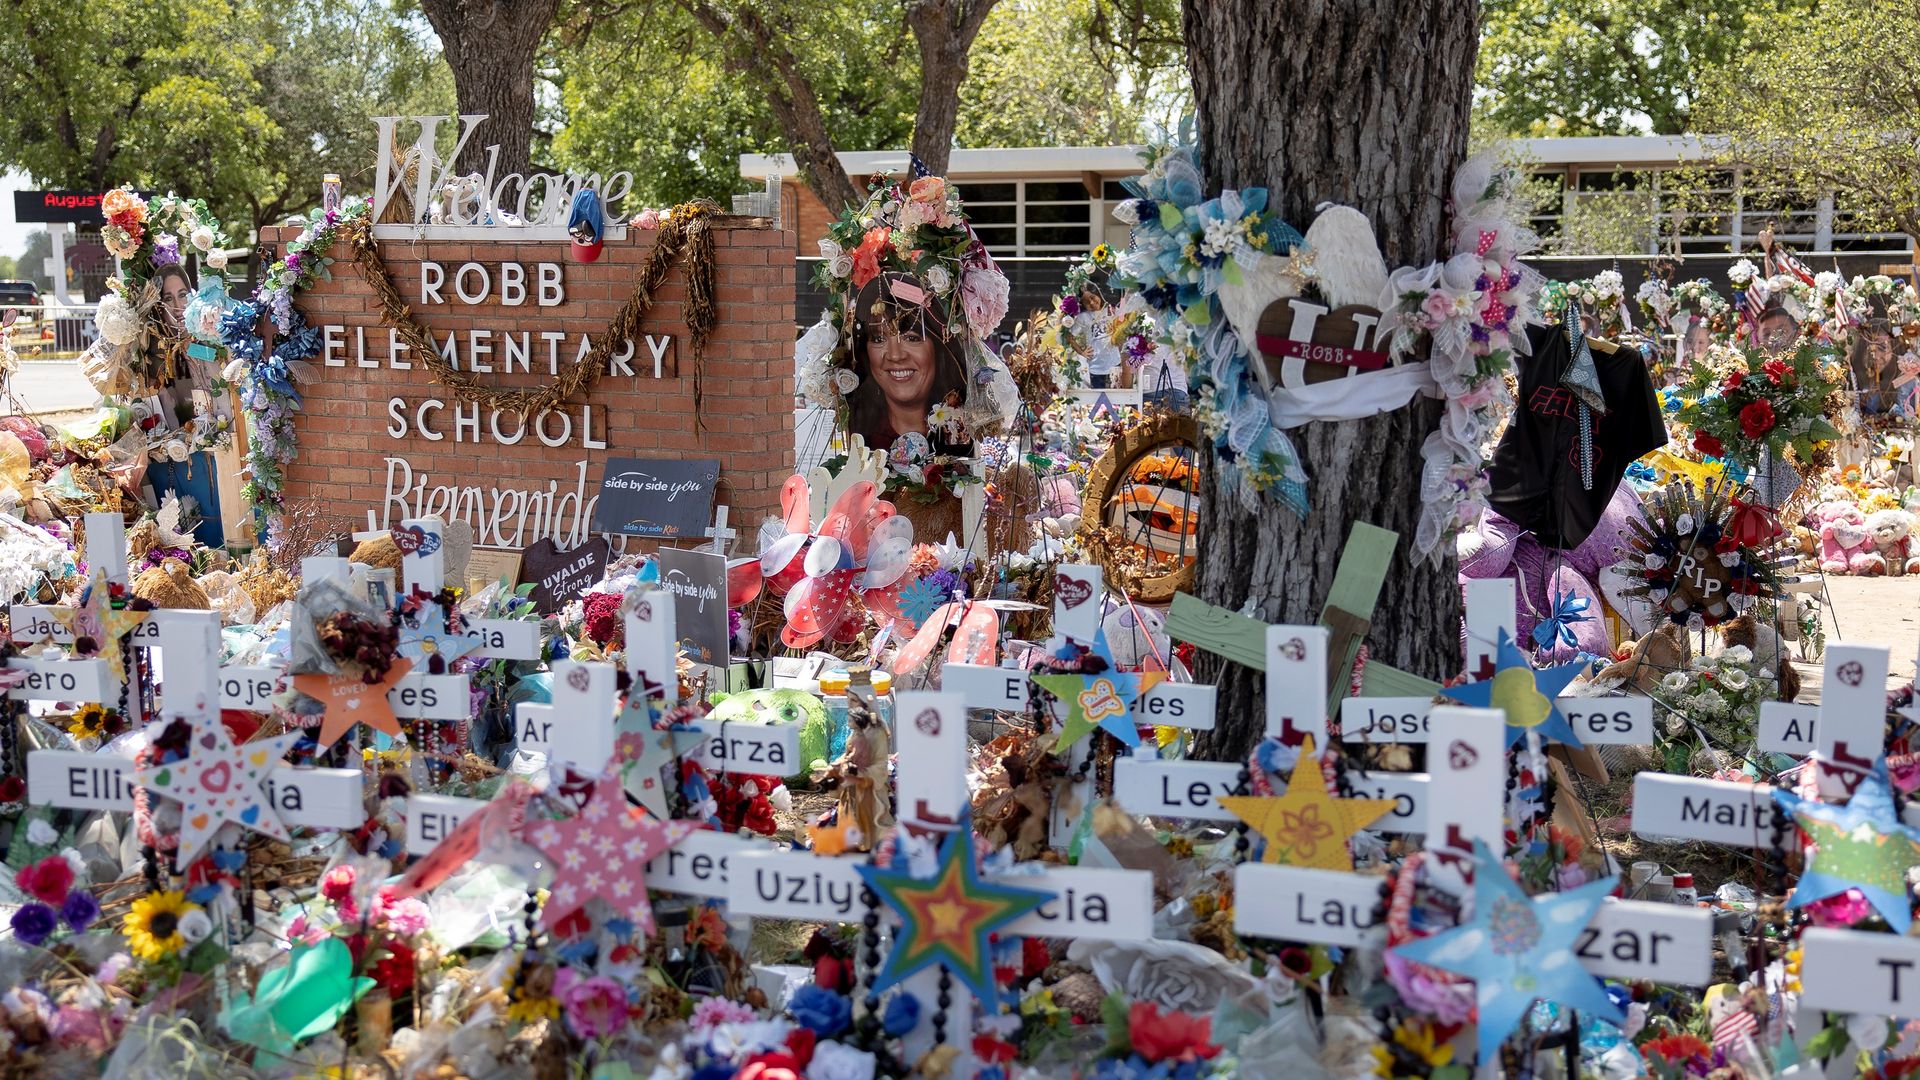 A makeshift memorial site outside the Robb Elementary School in Uvalde, Texas in August.